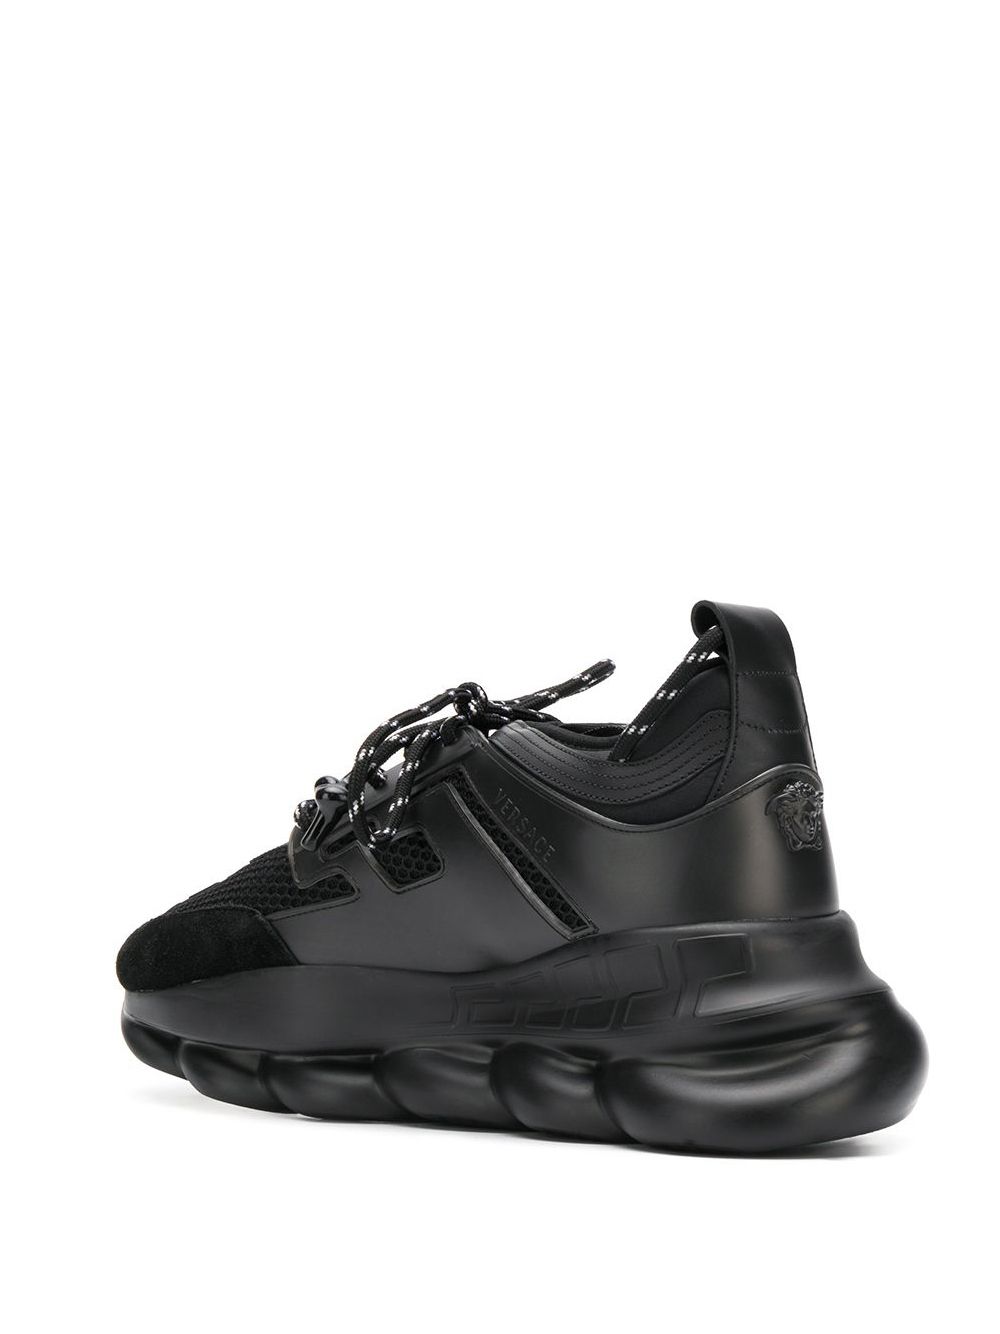 Buy Versace Chain Reaction Shoes: New Releases & Iconic Styles